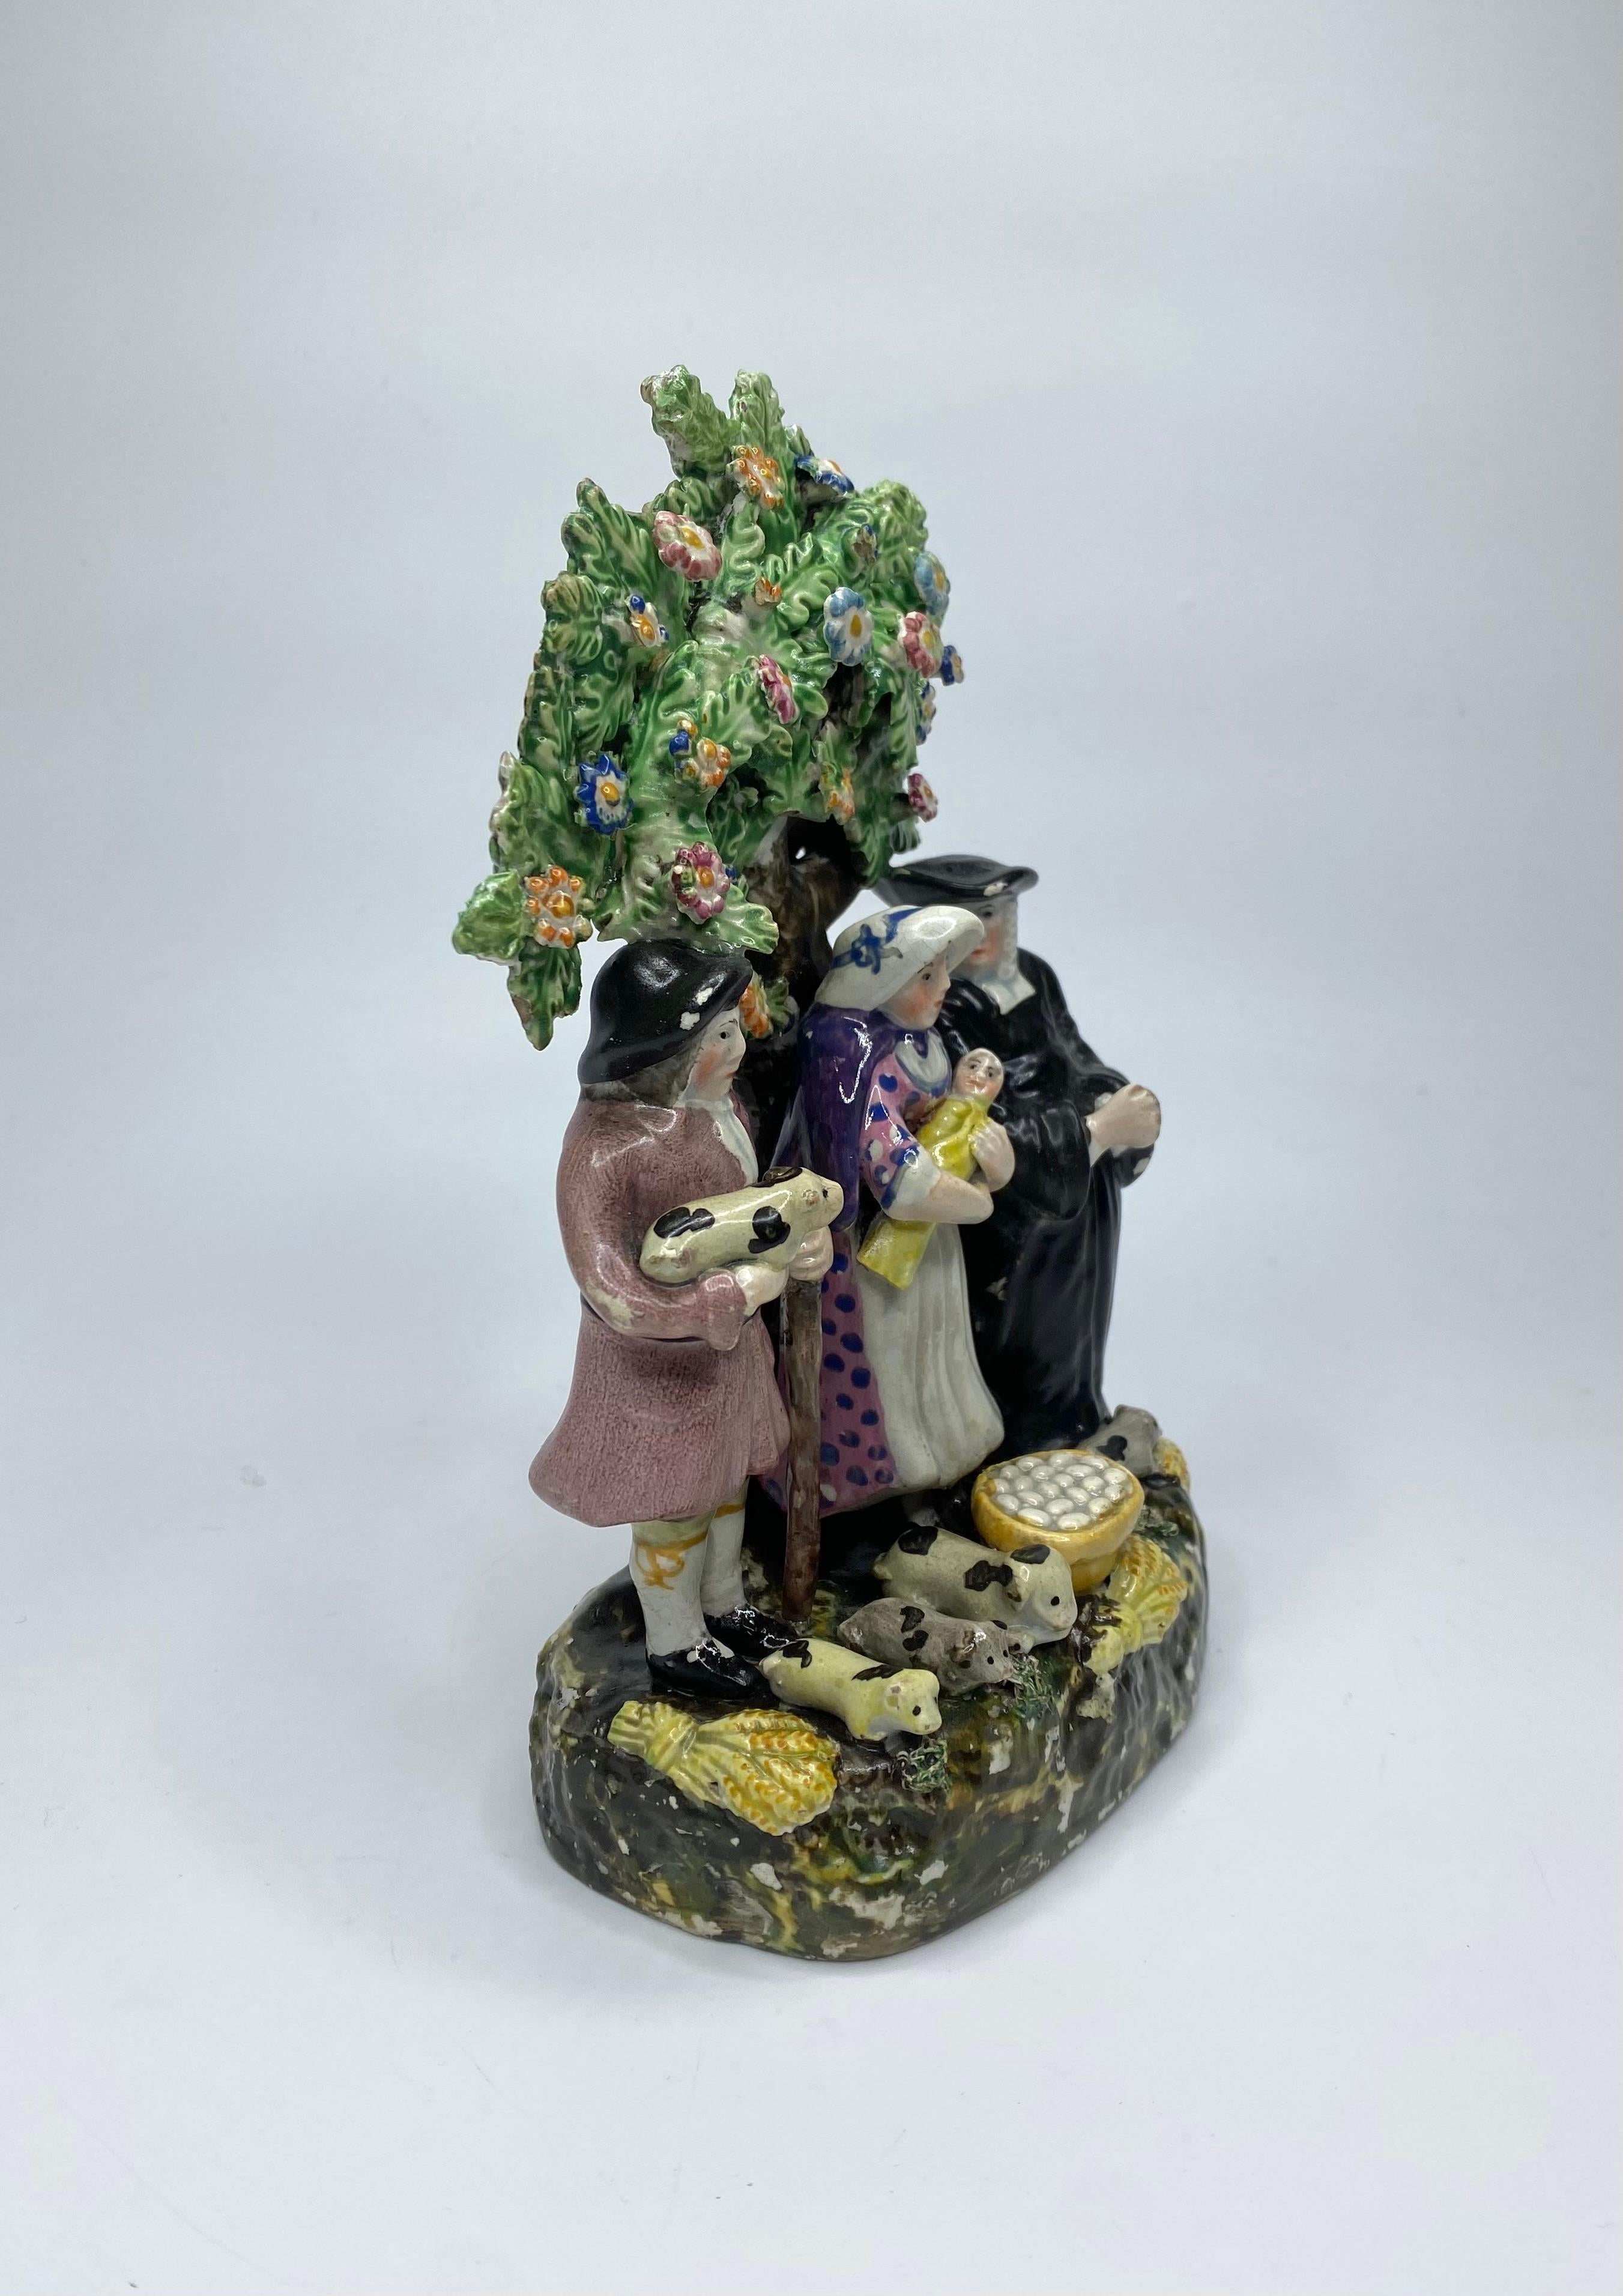 Staffordshire pottery ‘Tithe Pig’ bocage group, c. 1830. Modelled as the three characters stood before a tree. The farmer holding a pig, his wife holding their baby, and the vicar, looking towards them, with his hands in prayer. Before them, lay